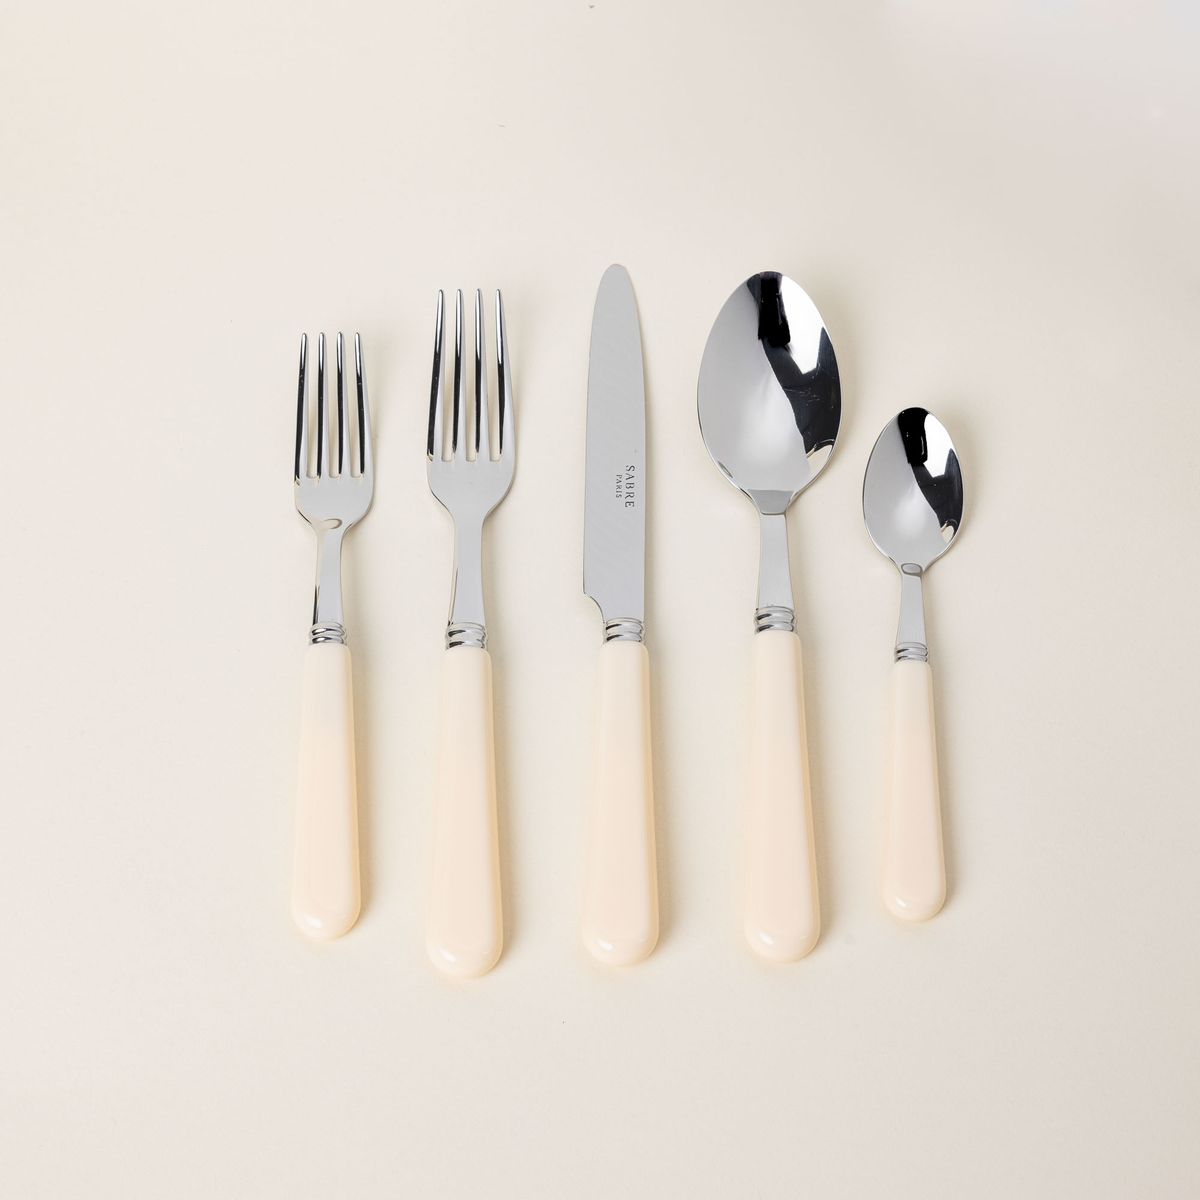 A five piece flatware set with shiny utensils and matte cream handles